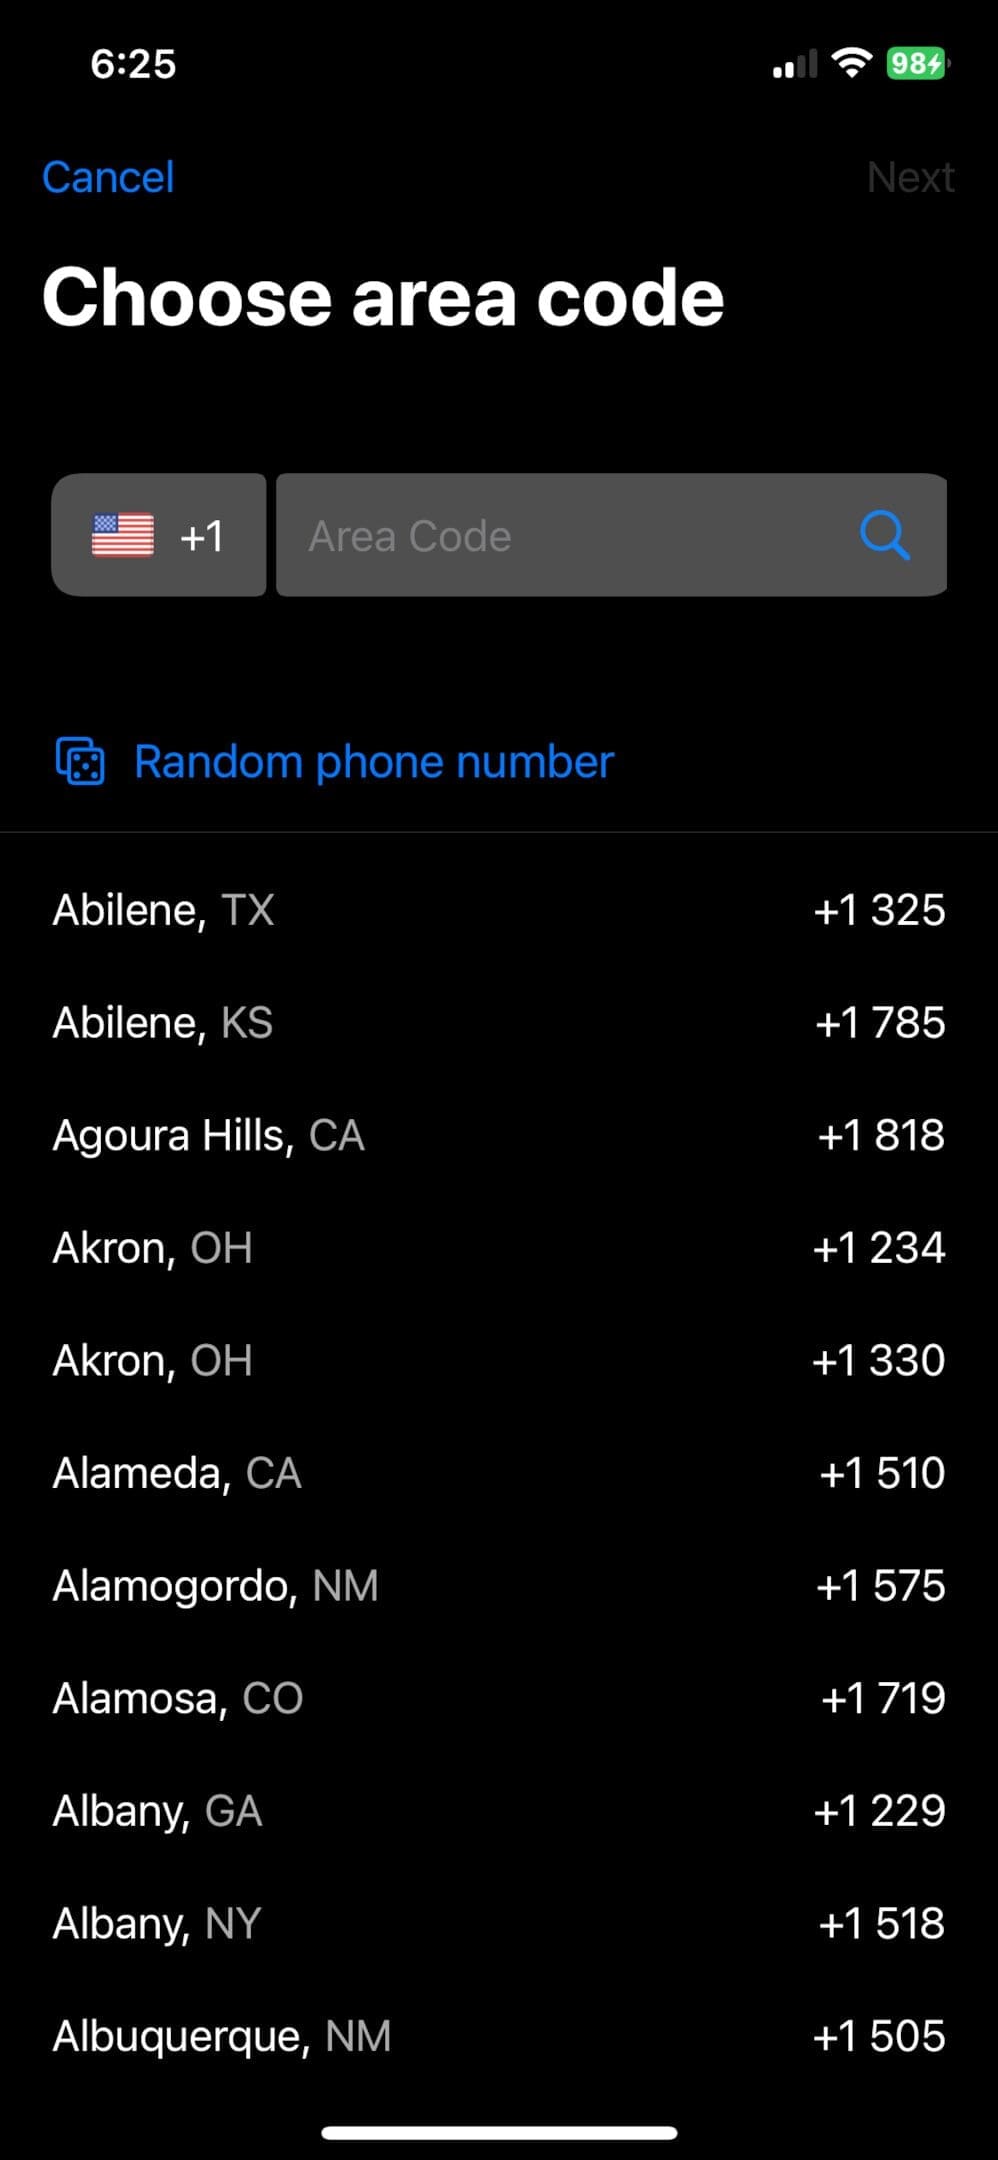 Choose area code screenshot from Fax App on iPhone